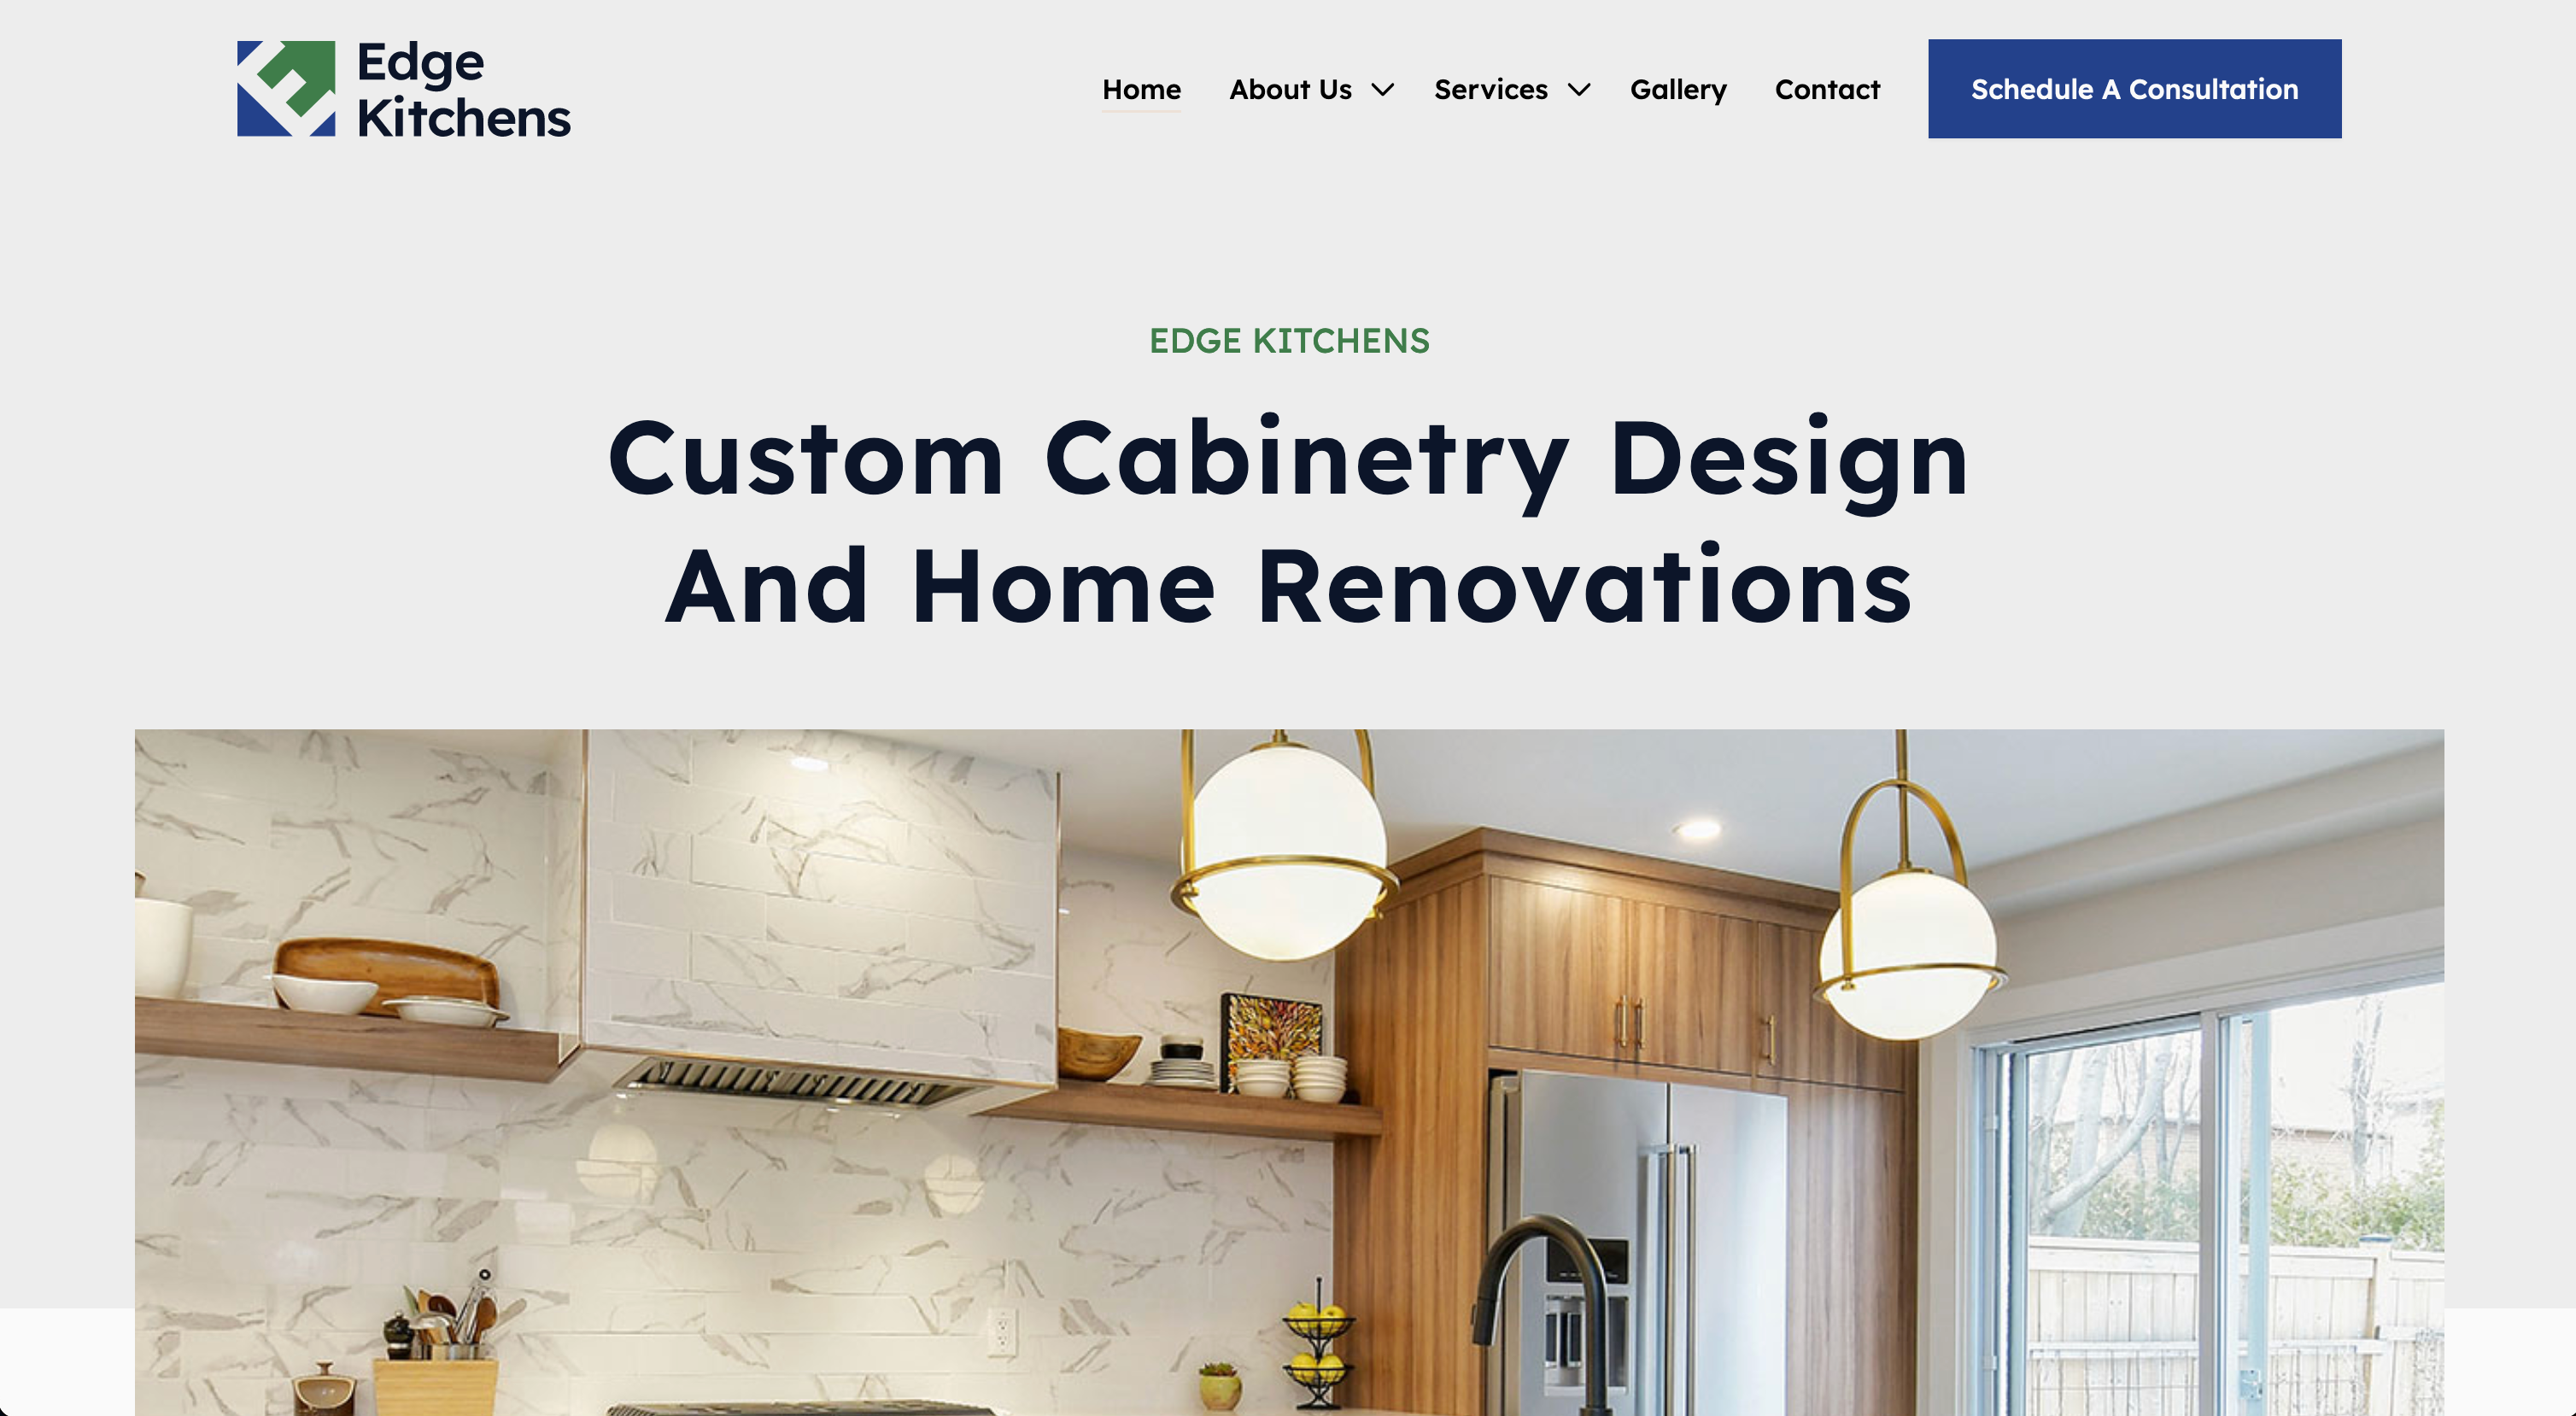 White landing page for Edge Kitchens website with an image of a kitchen